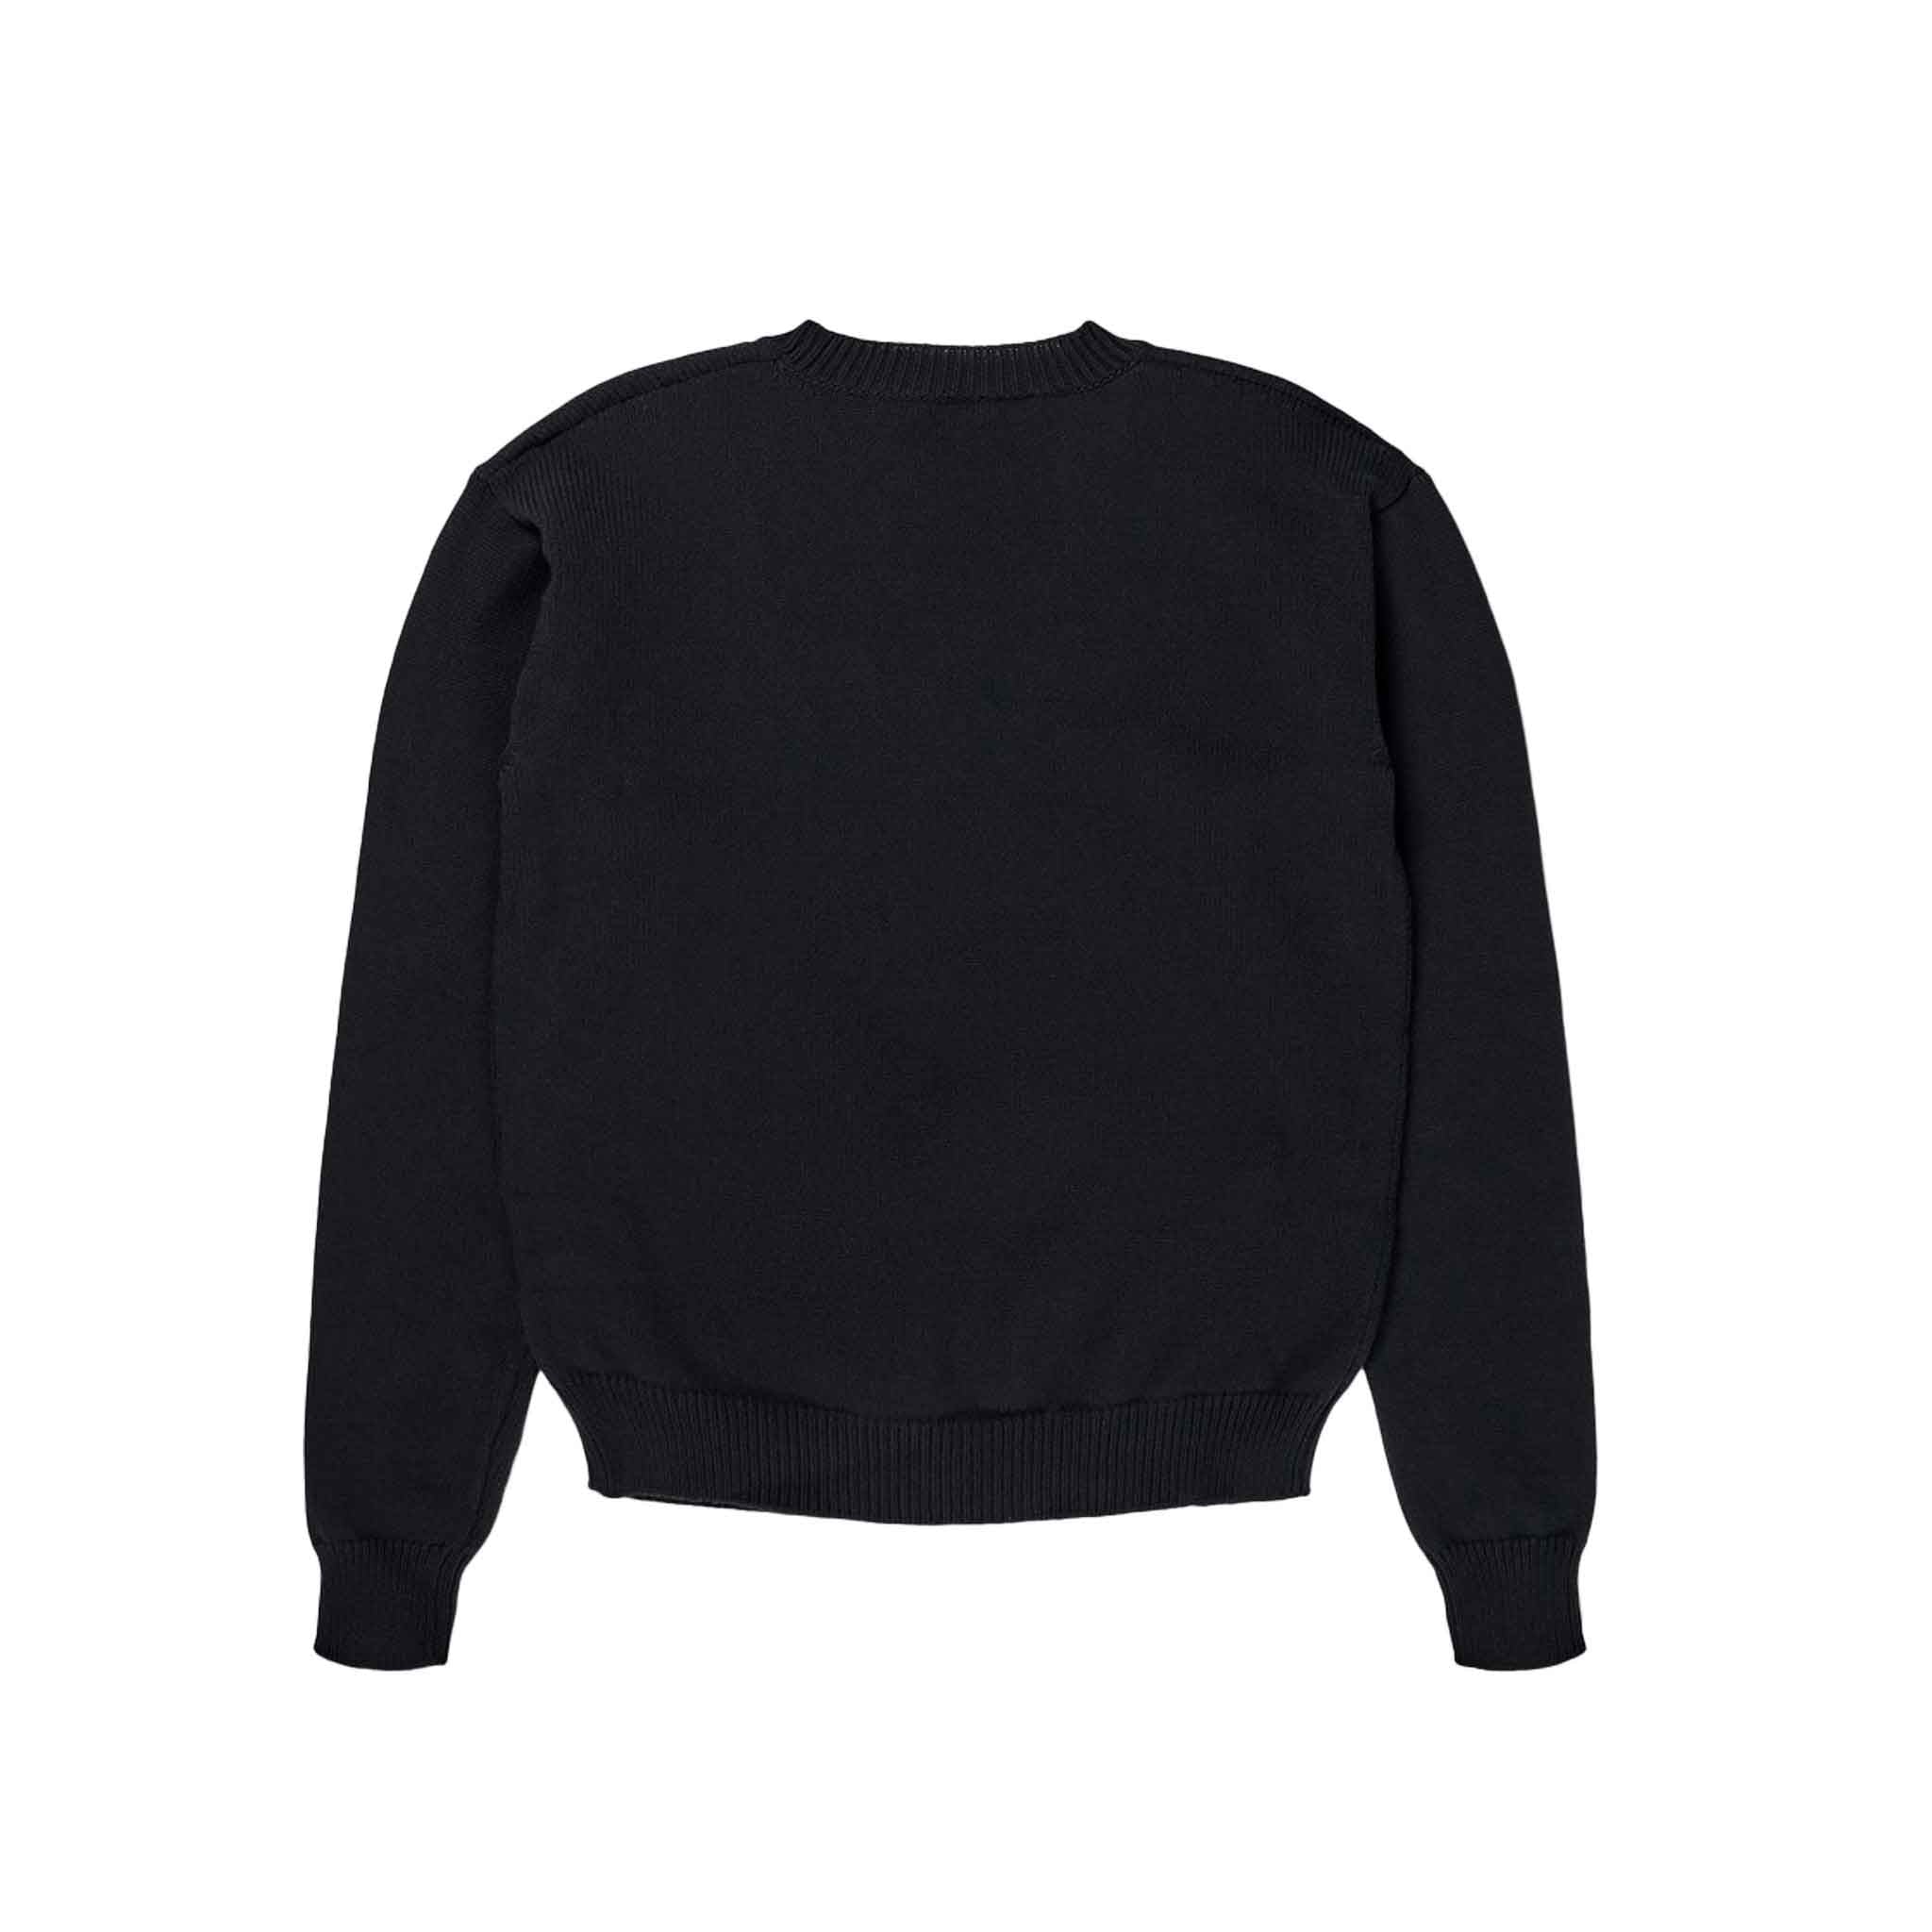 OFF-WHITE Single Arrow Crewneck Knit in Washed Black